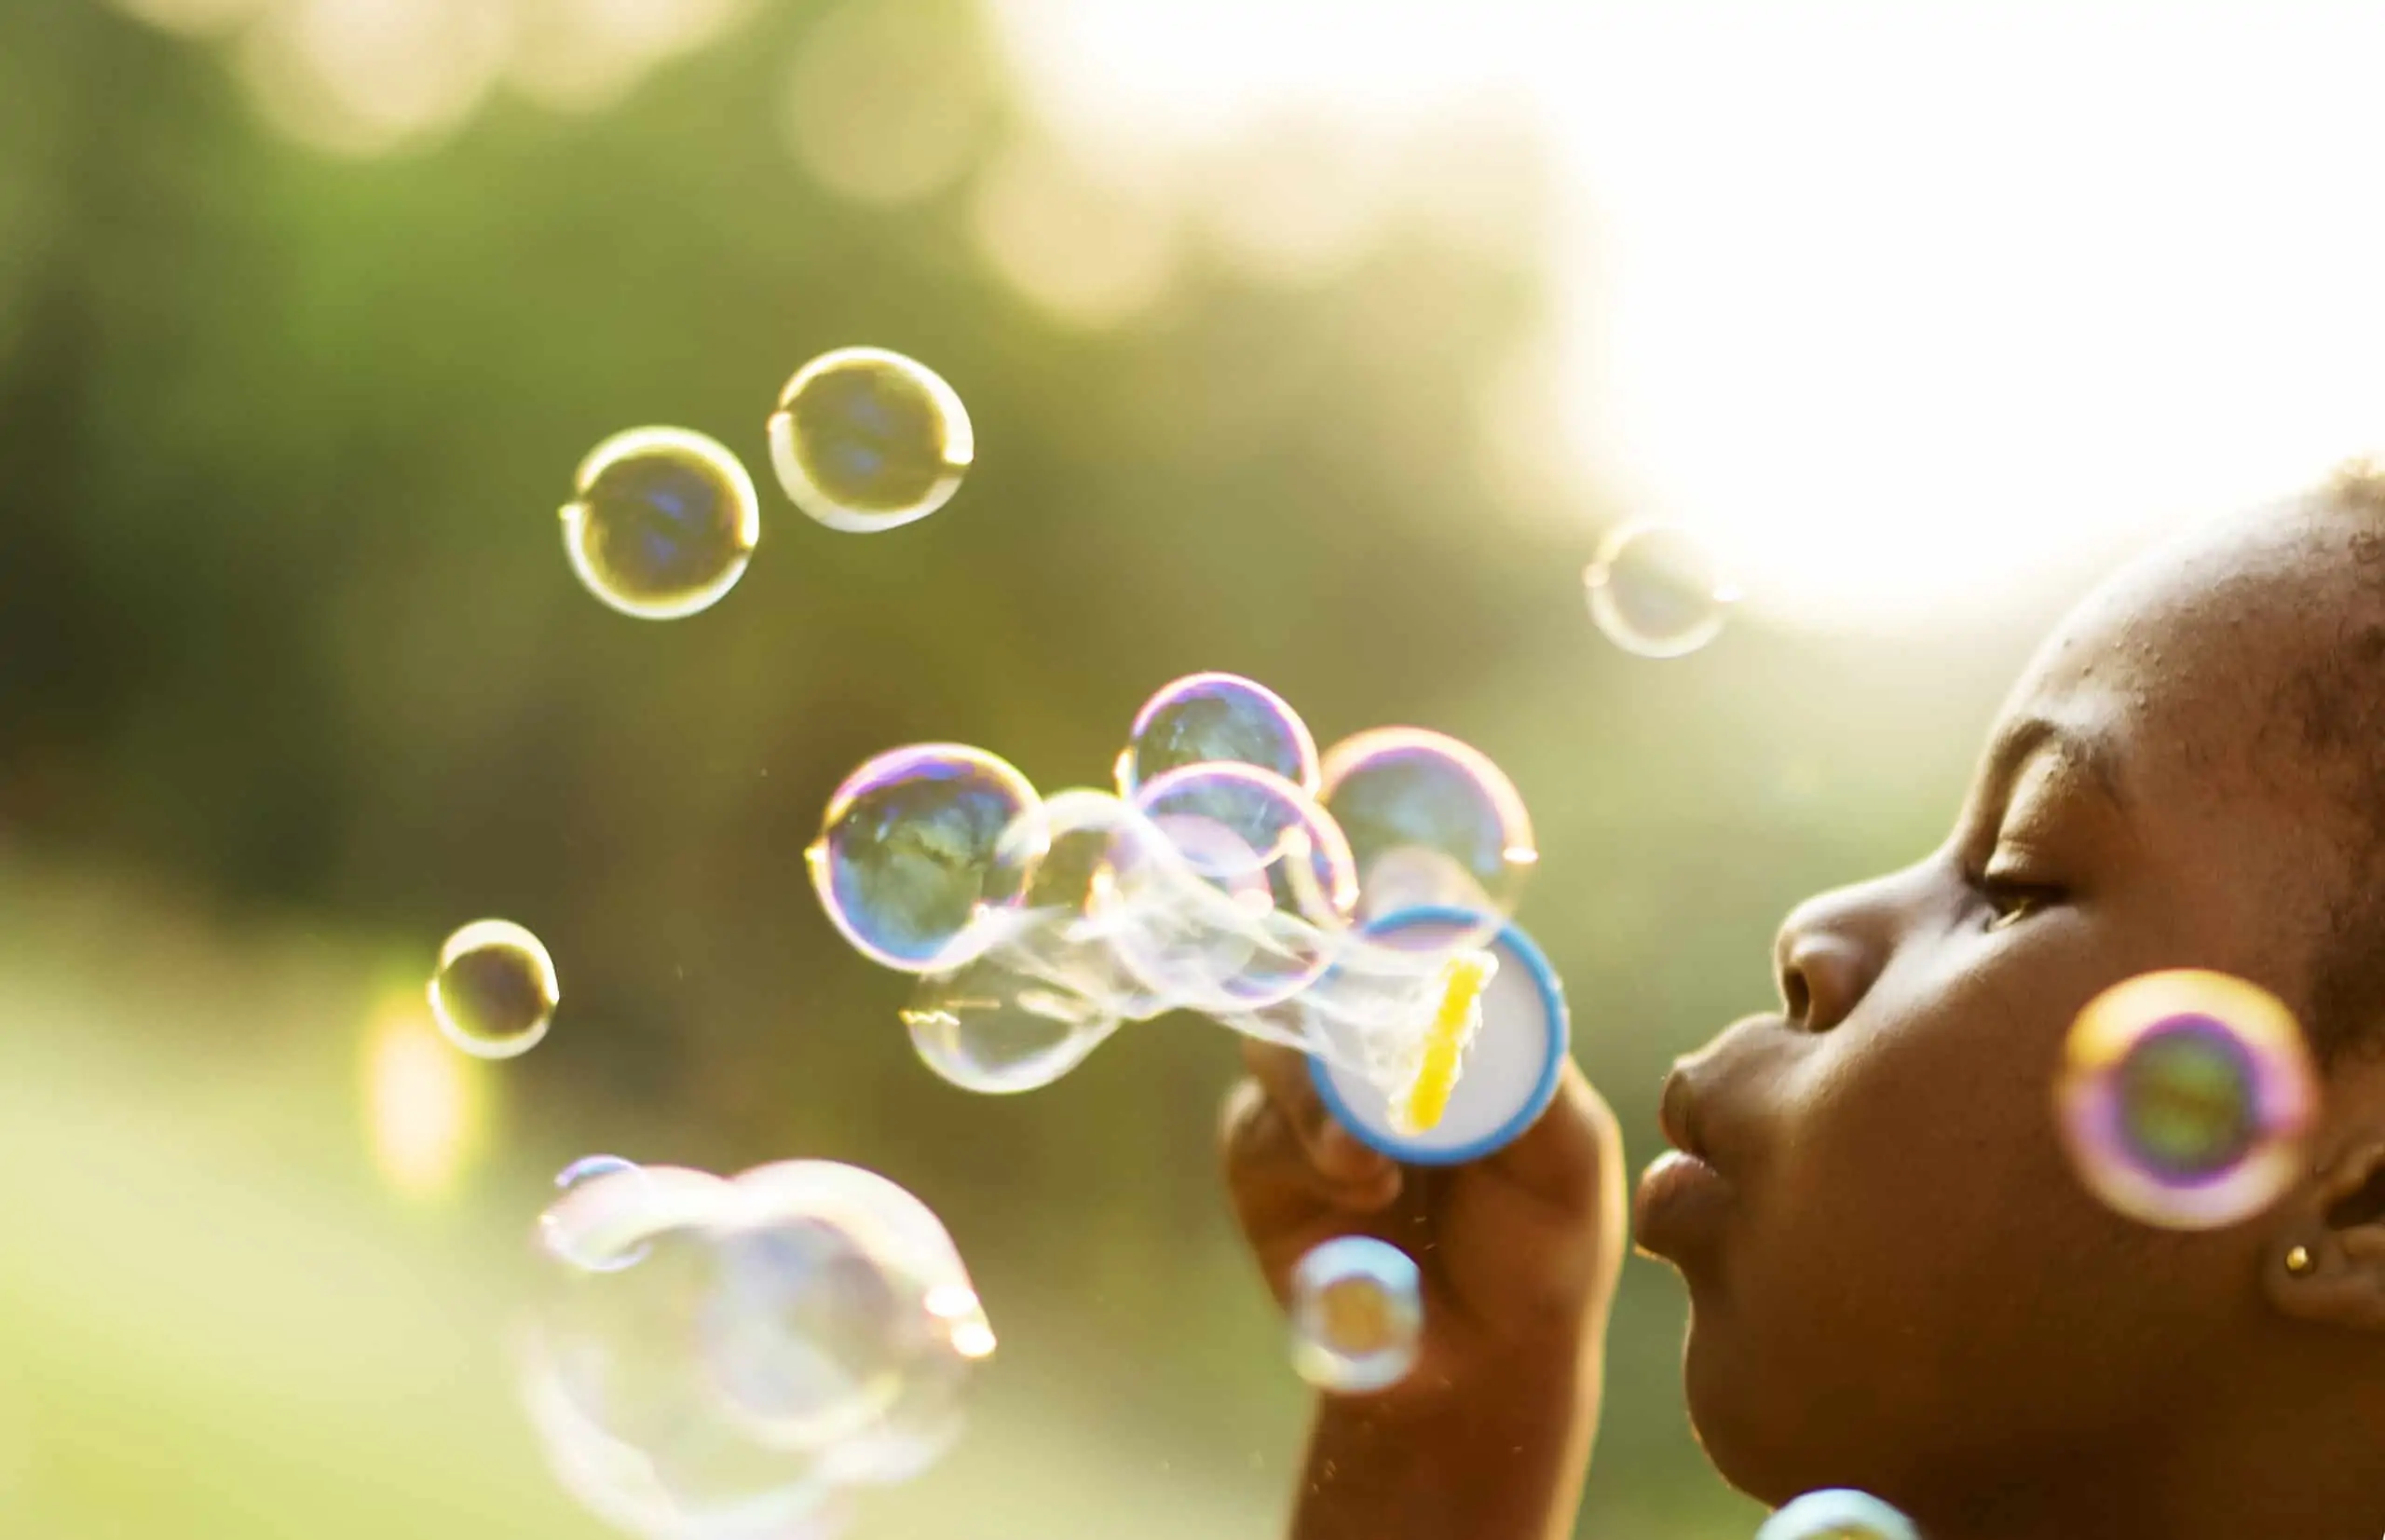 6 Awesome Games for a Bubble Themed Party